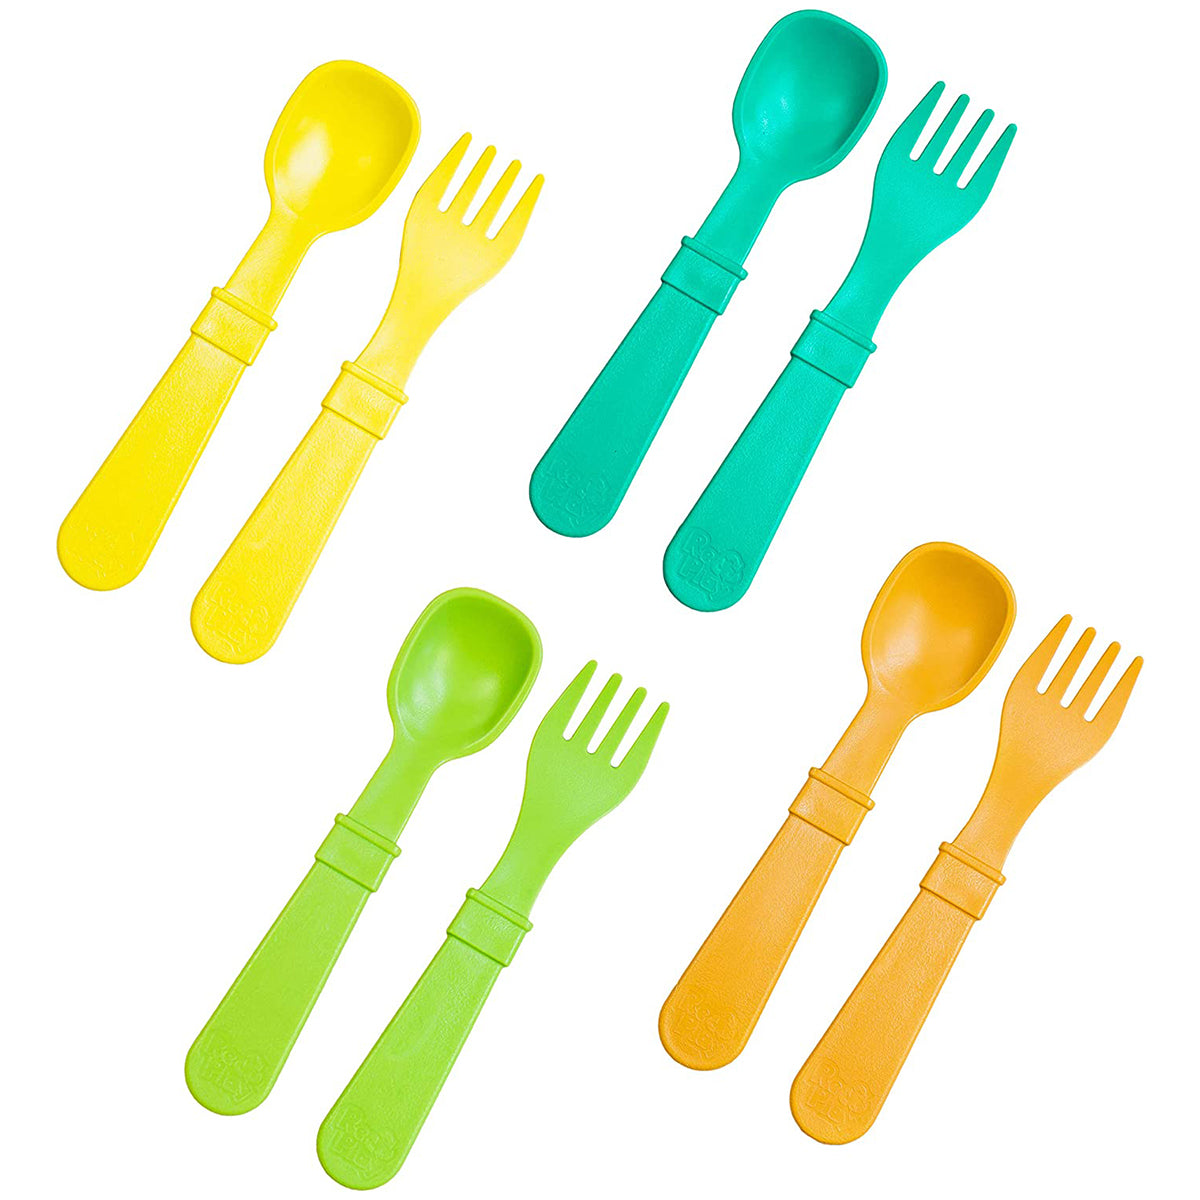 Packaged Utensils (Spoons And Forks)